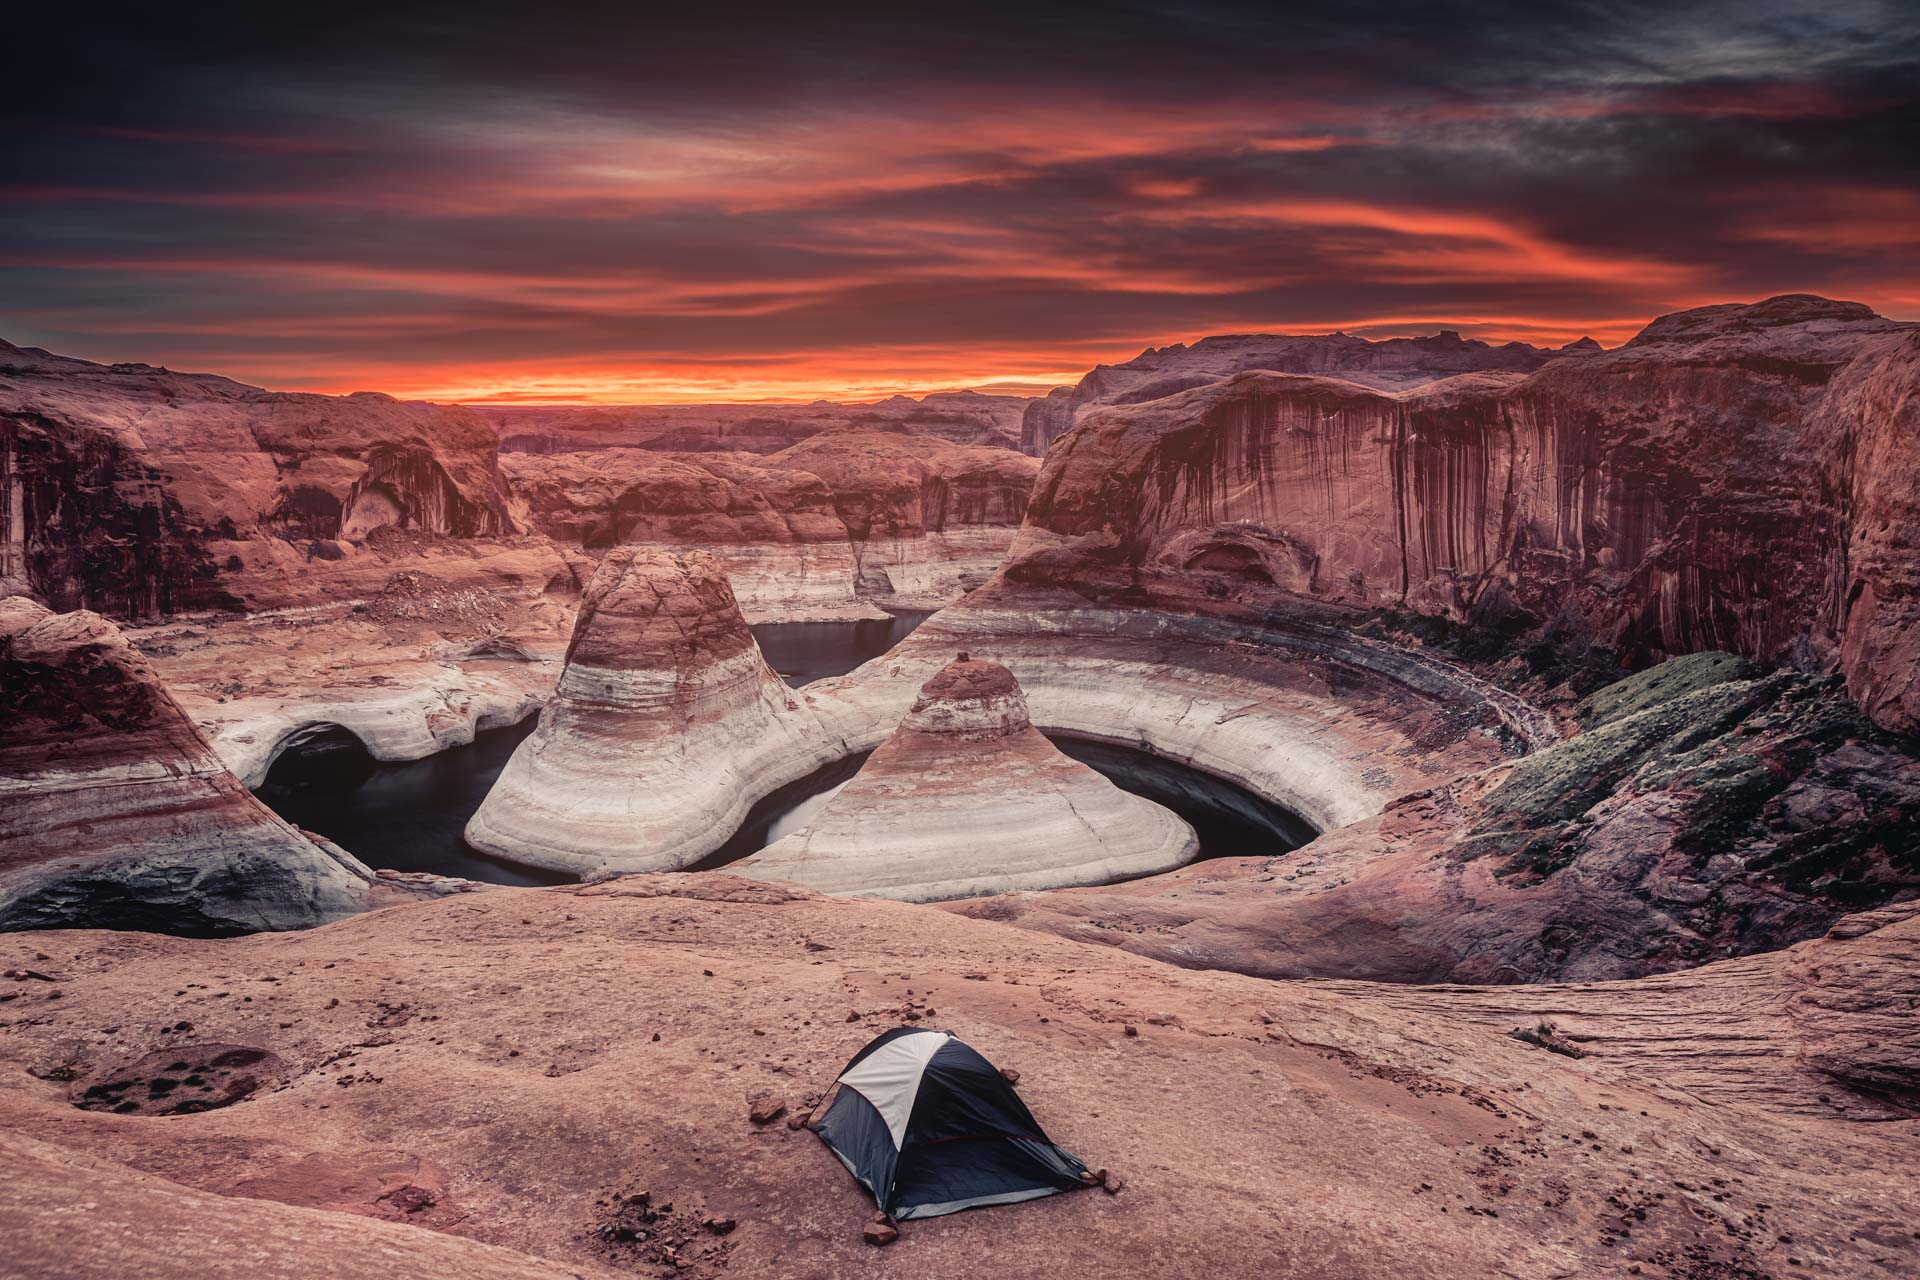 Sunrise at Reflection Canyon with a tent.